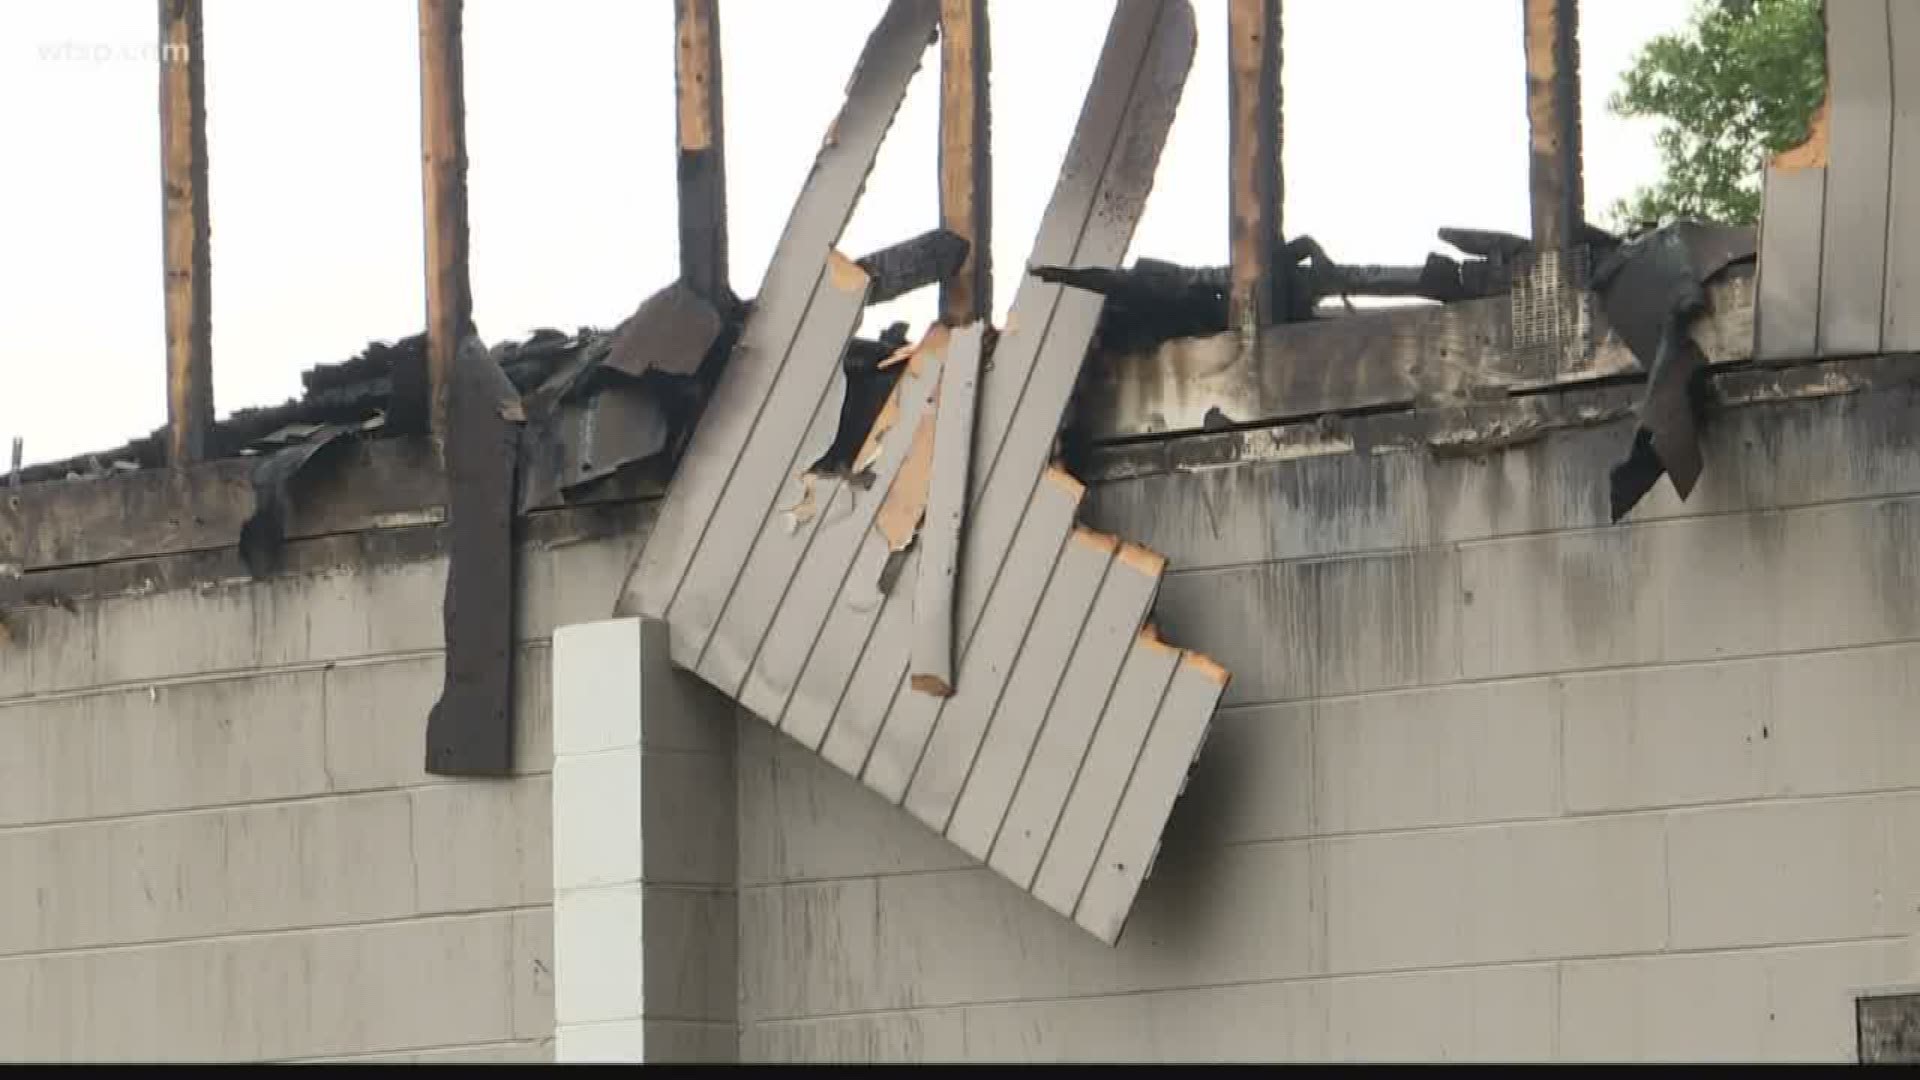 A Brandon church was damaged by a fire Thursday night, Hillsborough County Fire Rescue said.

The fire happened at New Testament Church on Dew Bloom Road. When crews arrived, flames were coming through the roof of the fellowship hall, fire officials said.